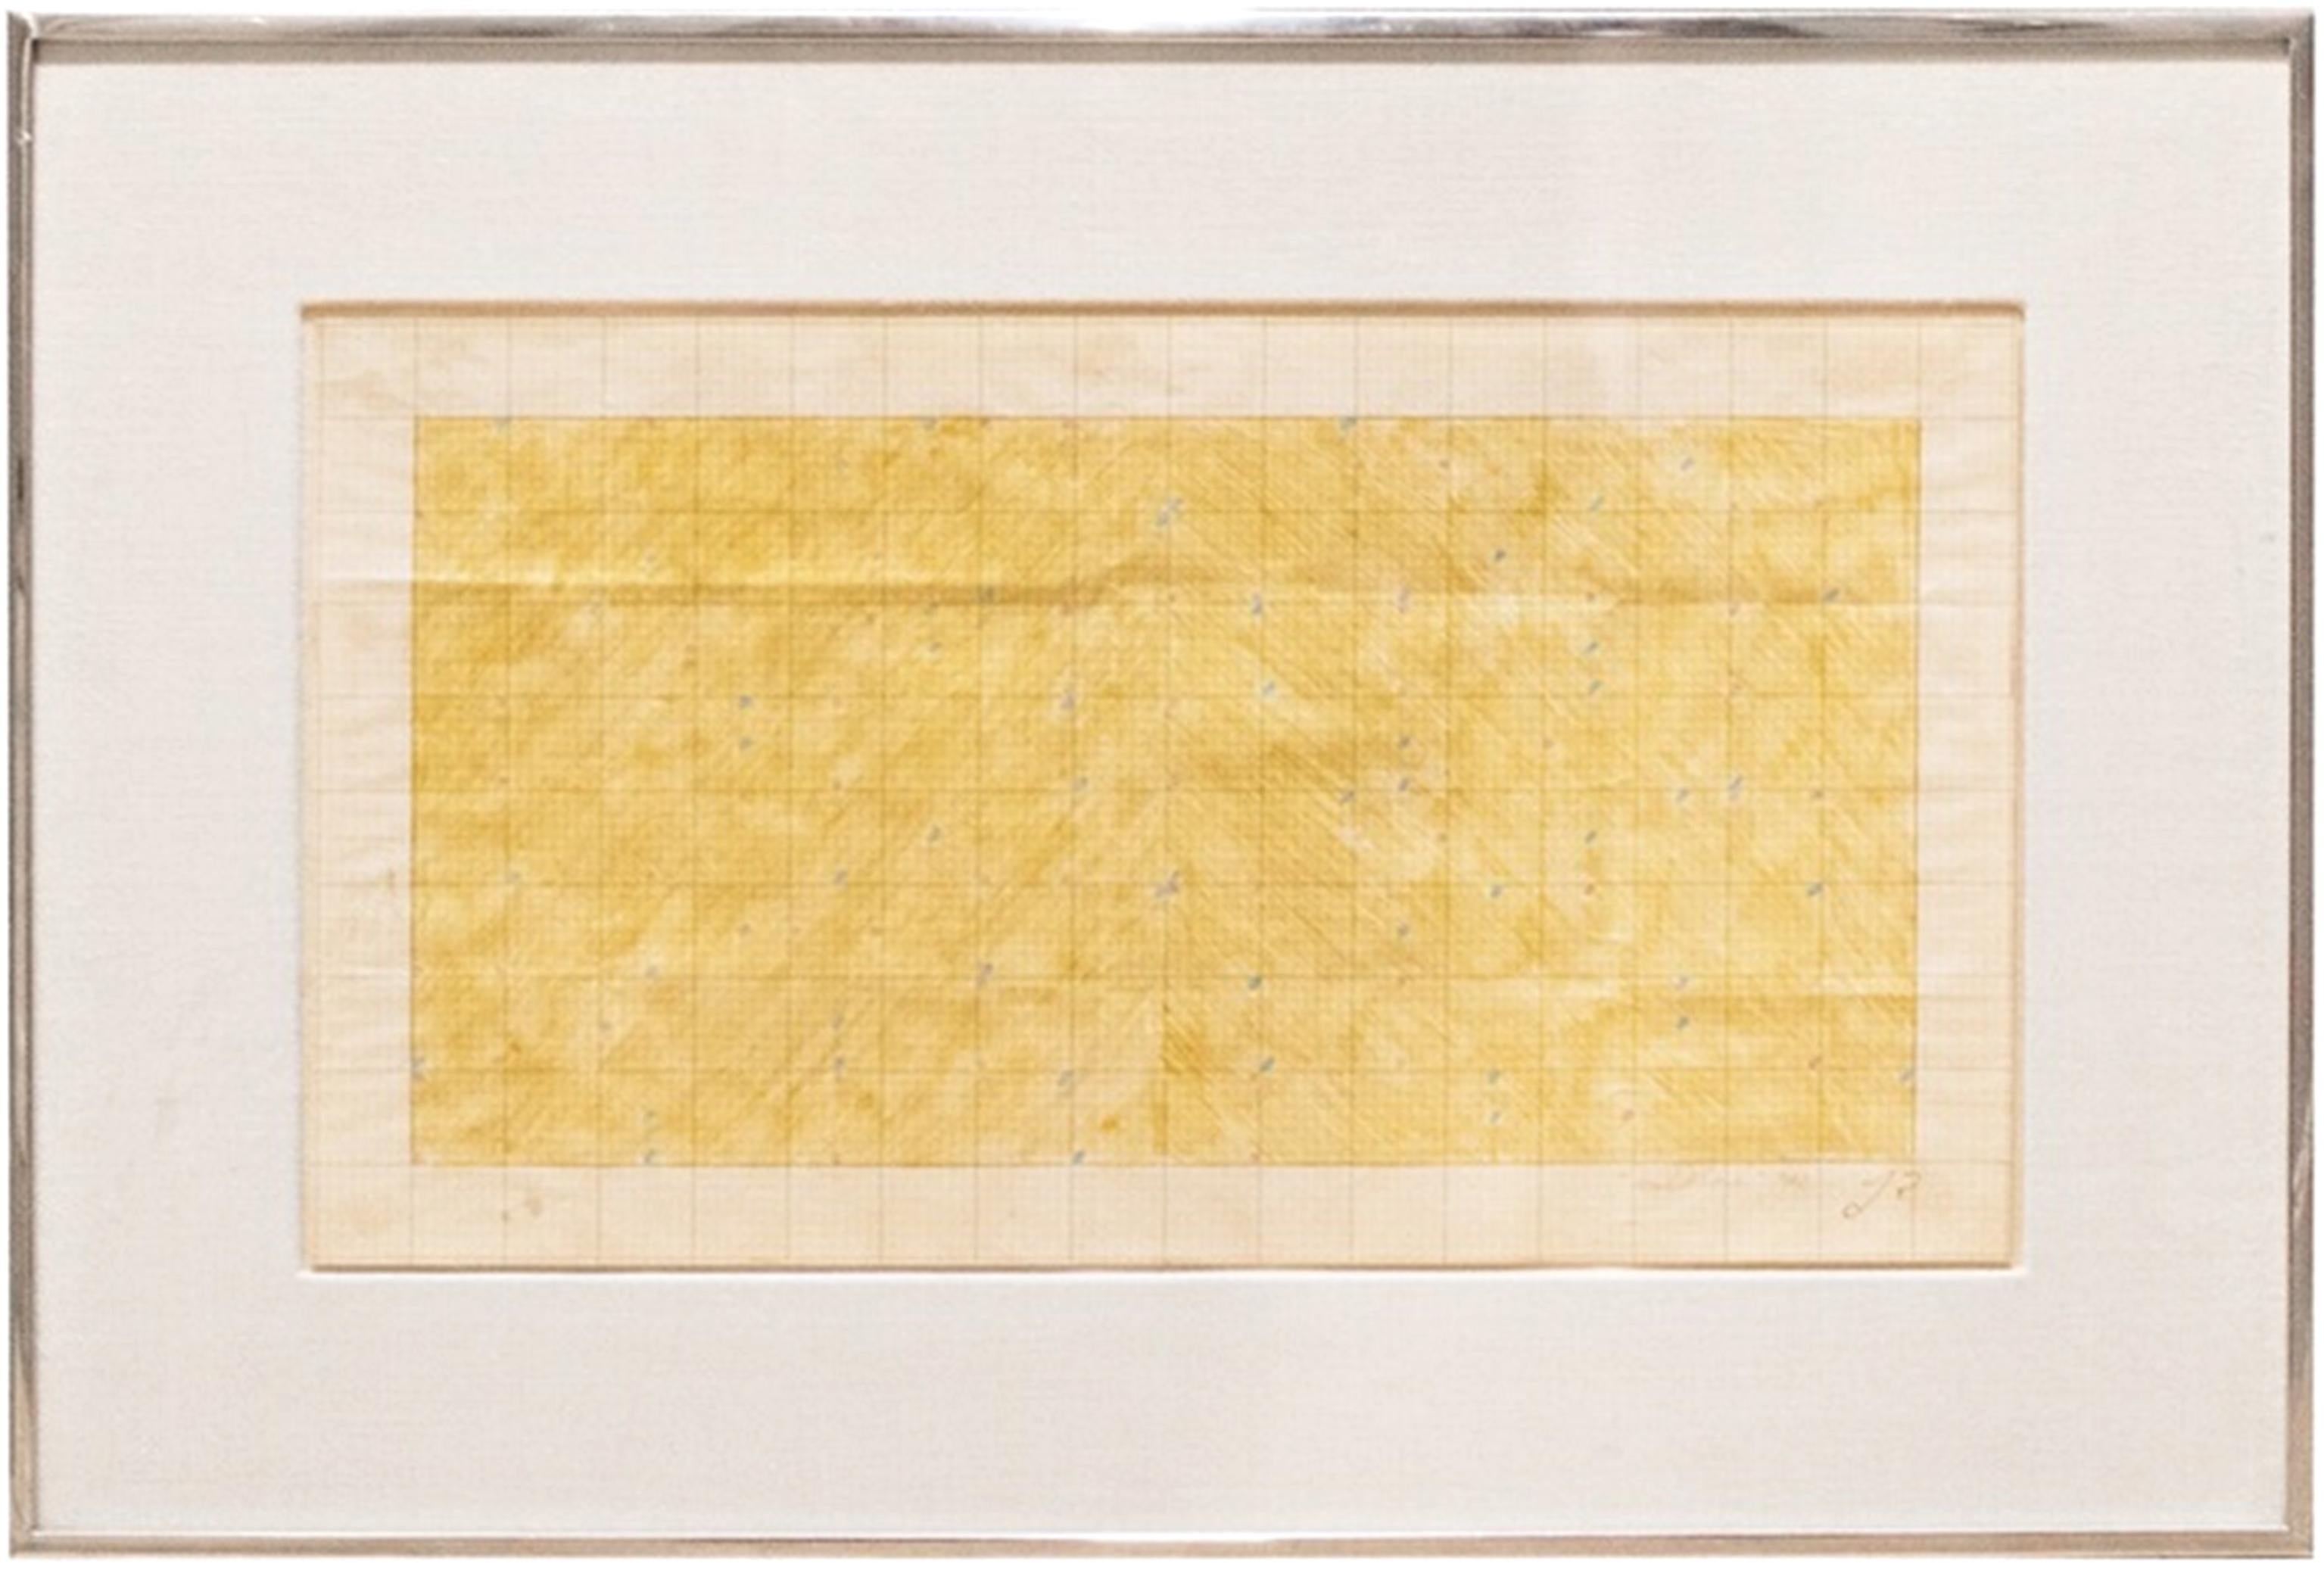 Midget Racer (unique Mid Century Modern Color Field Abstract Geometric drawing) - Art by Larry Poons